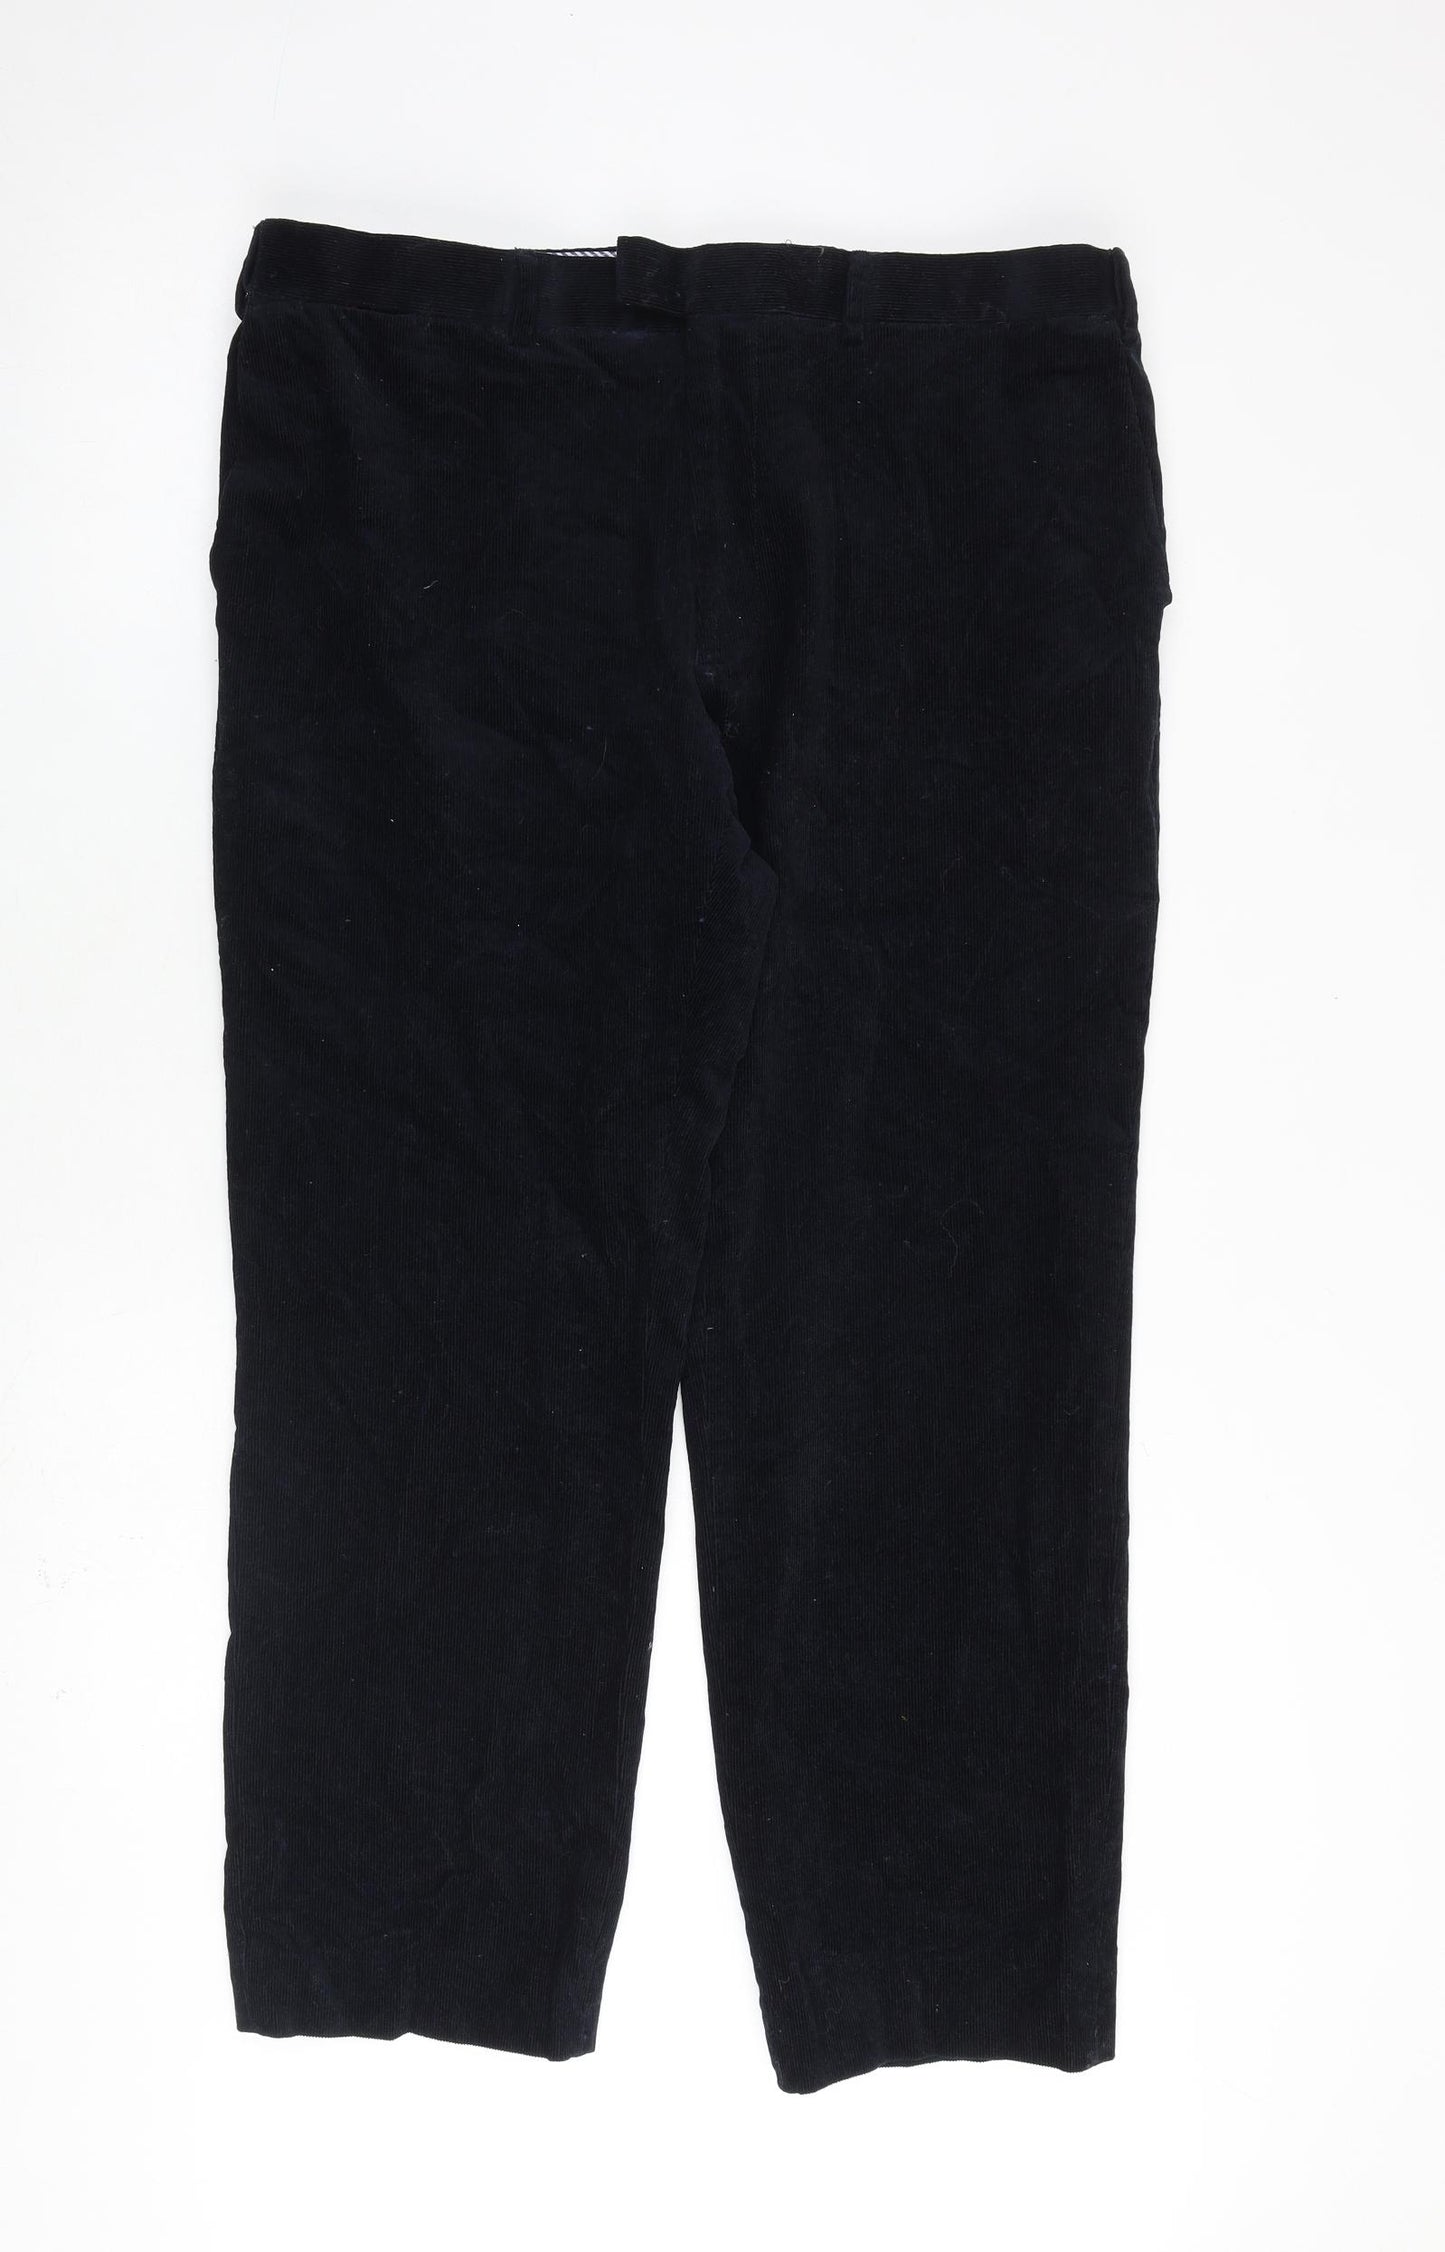 Marks and Spencer Mens Blue Cotton Dress Pants Trousers Size 38 in L31 in Regular Zip